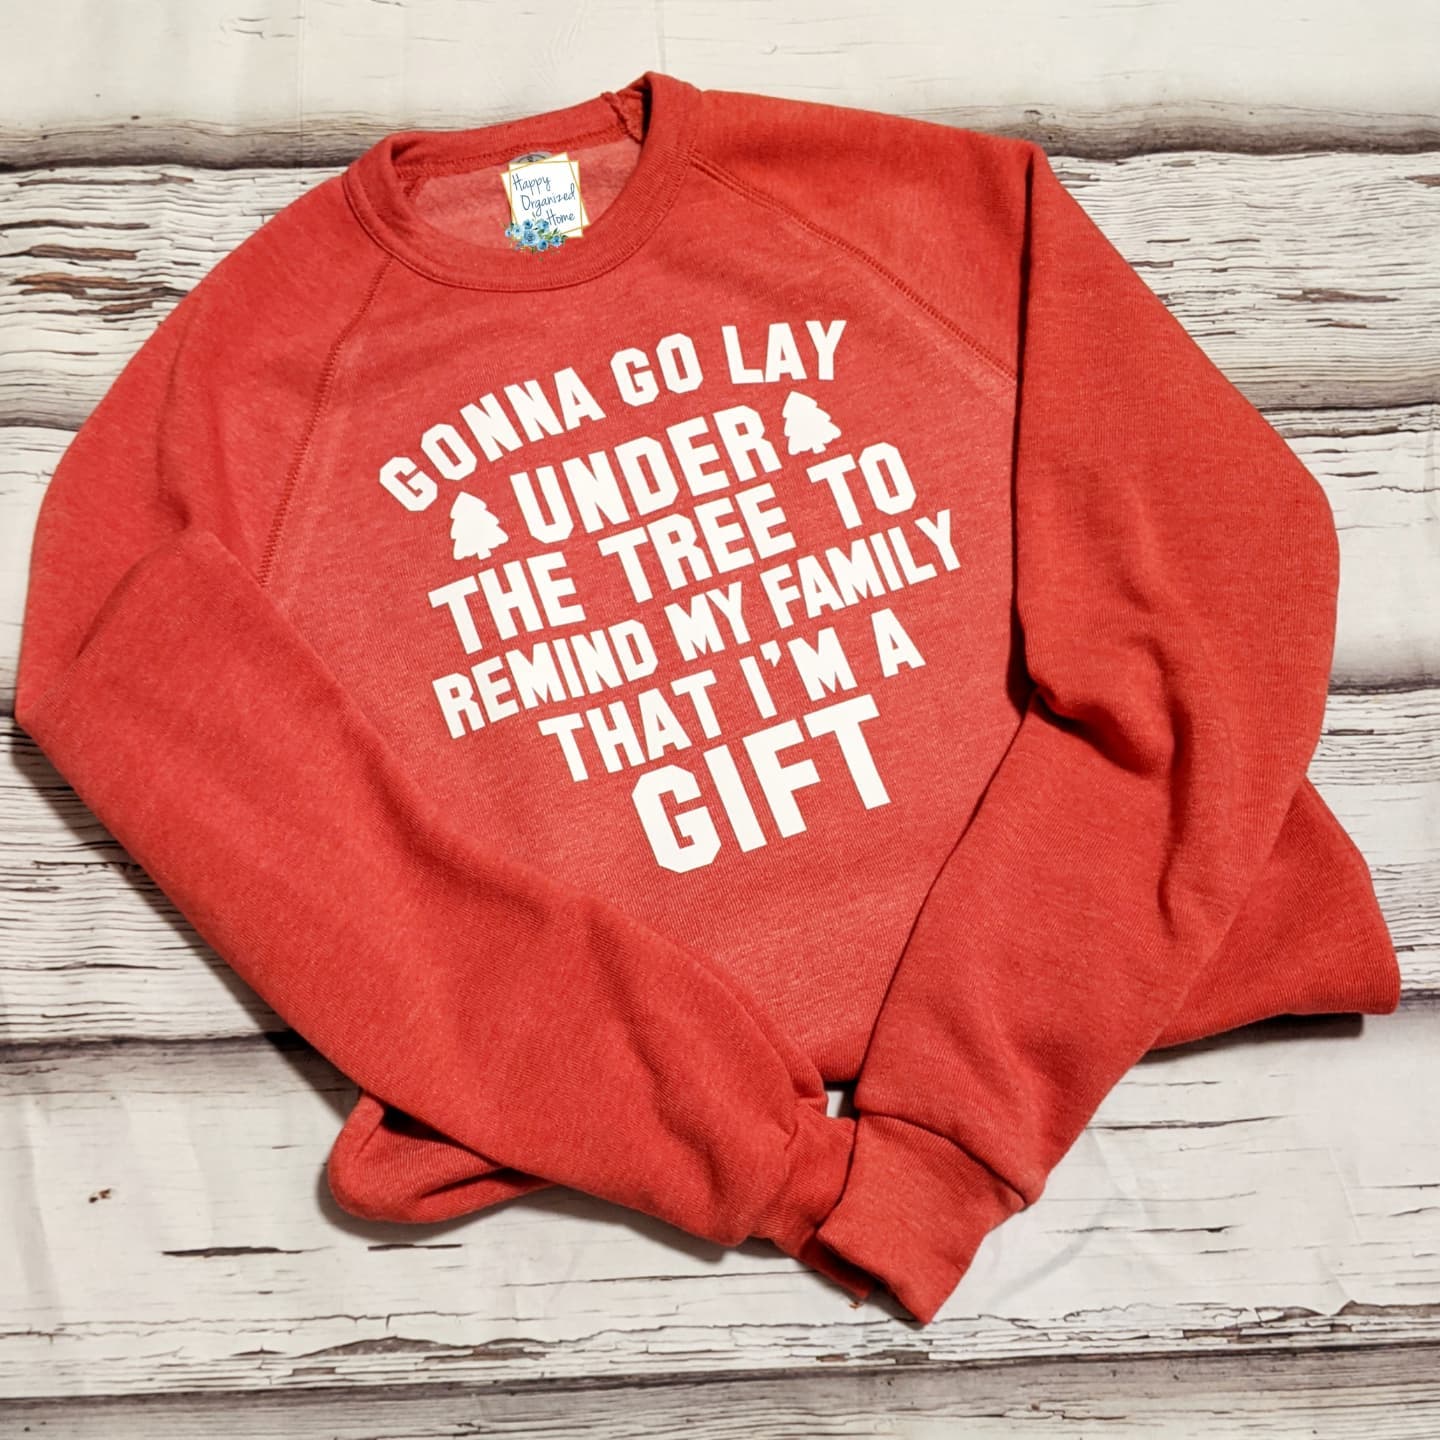 Gonna Go Lay under the tree to remind my family that I'm a gift-   Comfy sweatshirt